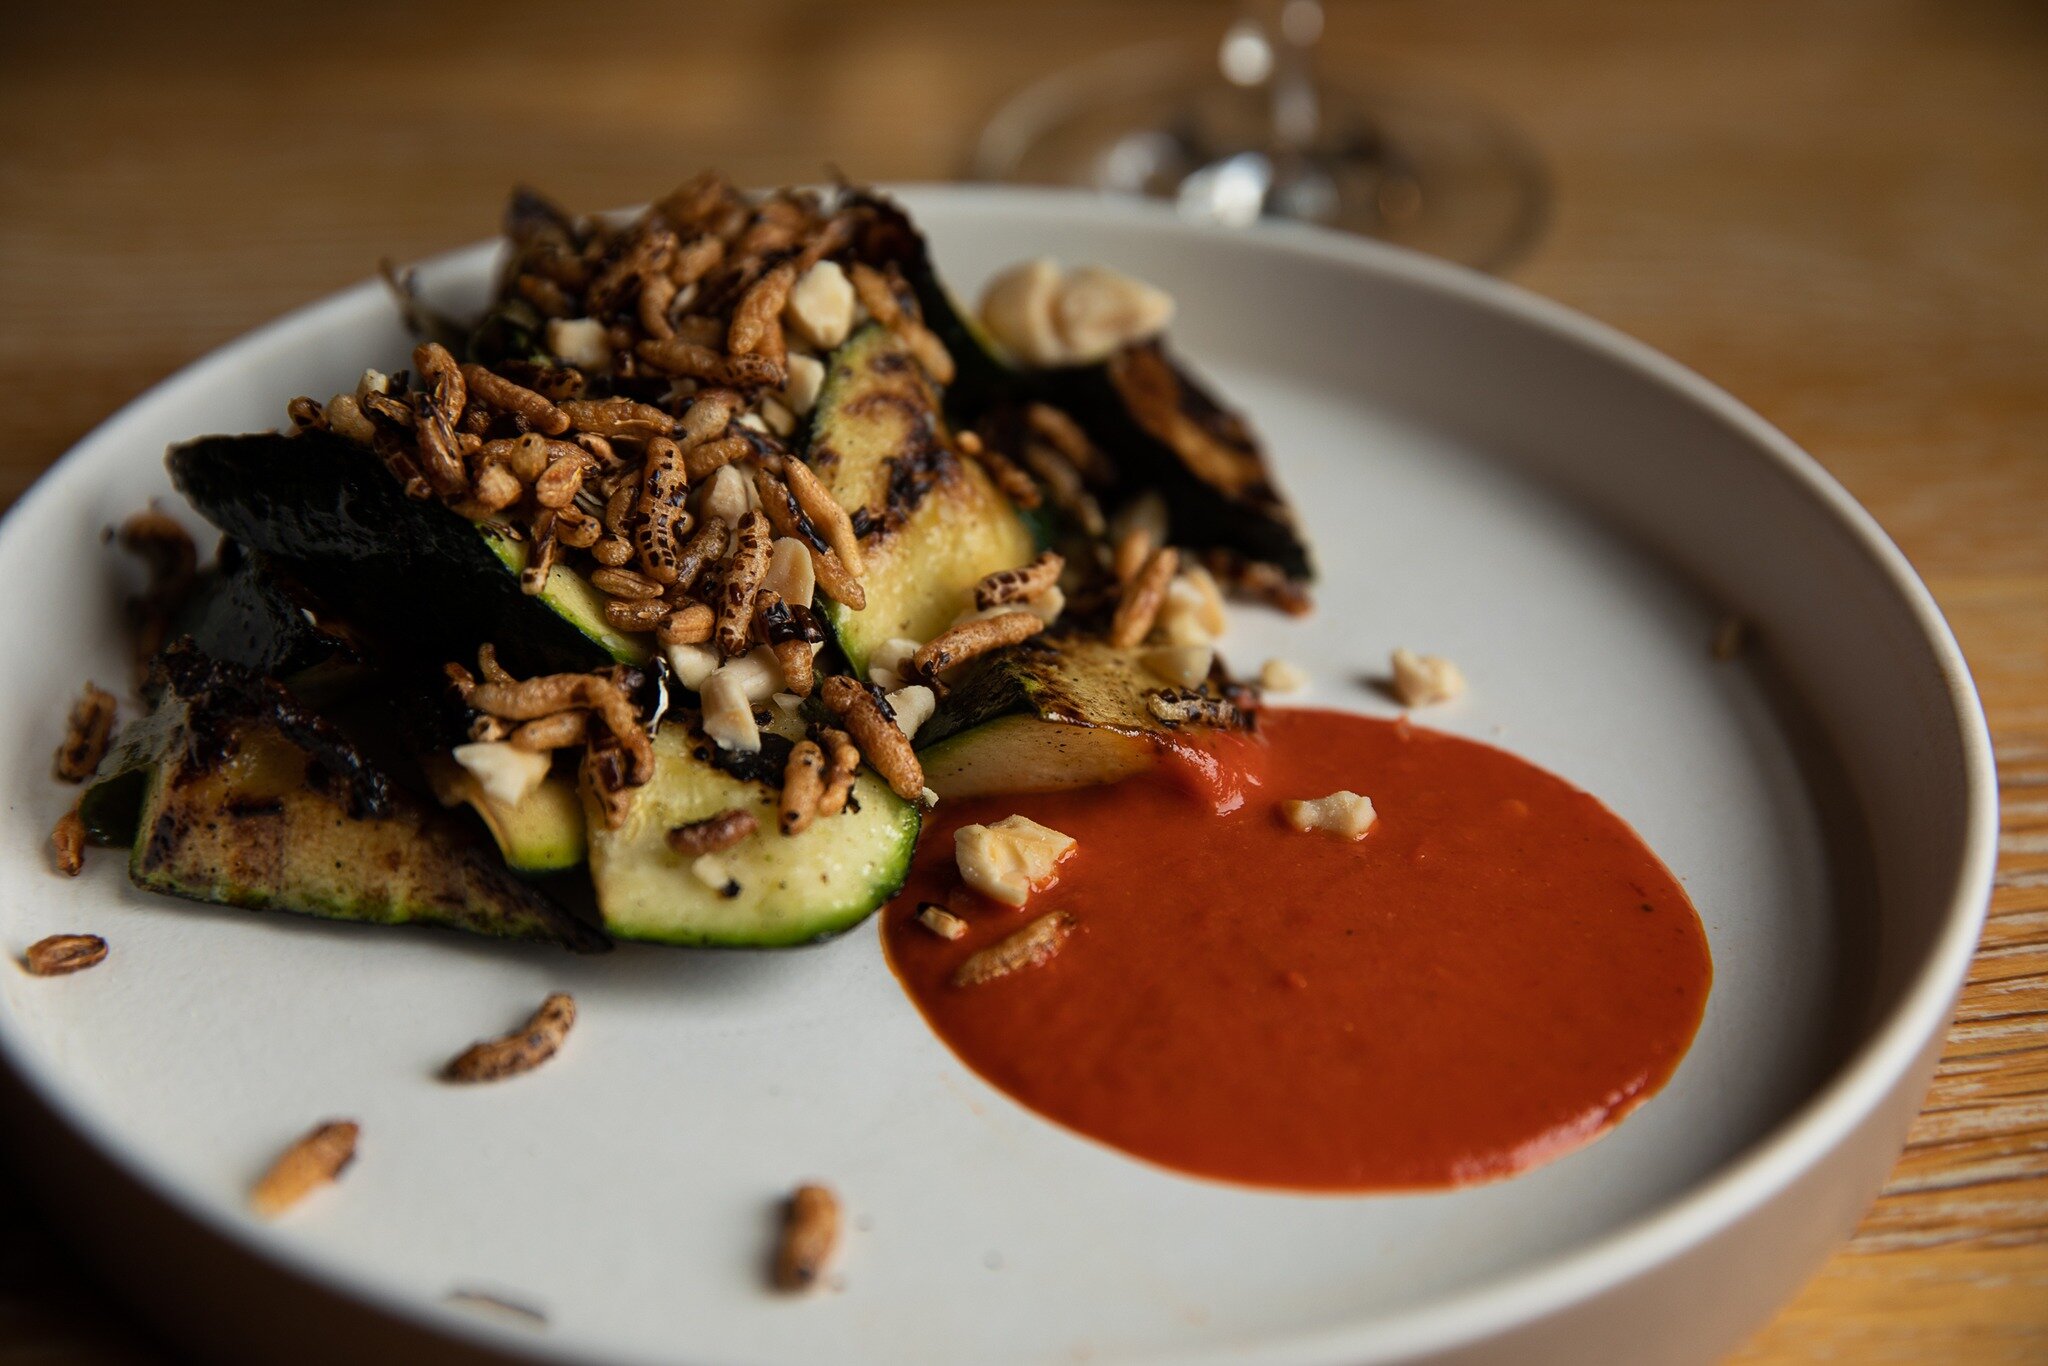 Grilled Zucchini, toasted almonds, puffed wild rice and romesco. The perfect entree or accompanimment to one of our mains. Secure a table for this week via our website.
.
.
.
 #TheVale #melbournefood #foodandwine #vino #ascotvale #melbourneeats #dinn